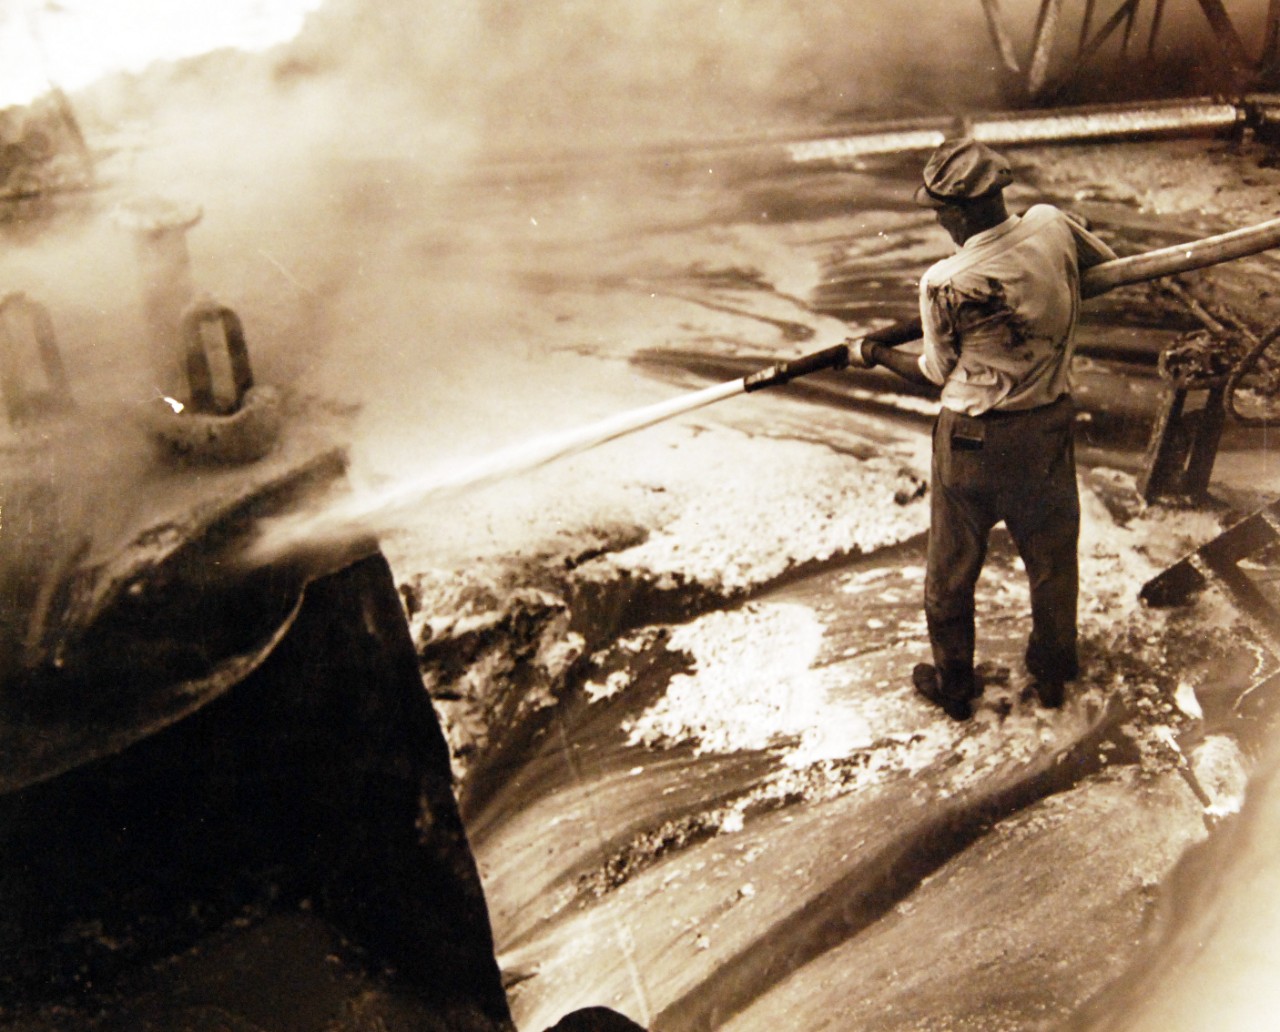 <p>80-G-61578: German U-boat attacks, WWII. SS Pennsylvania Sun burning after being torpedoed amidships by a torpedo by U-571 on July 15, 1942. Shown: Using foamite on oil fire.&nbsp;</p>
